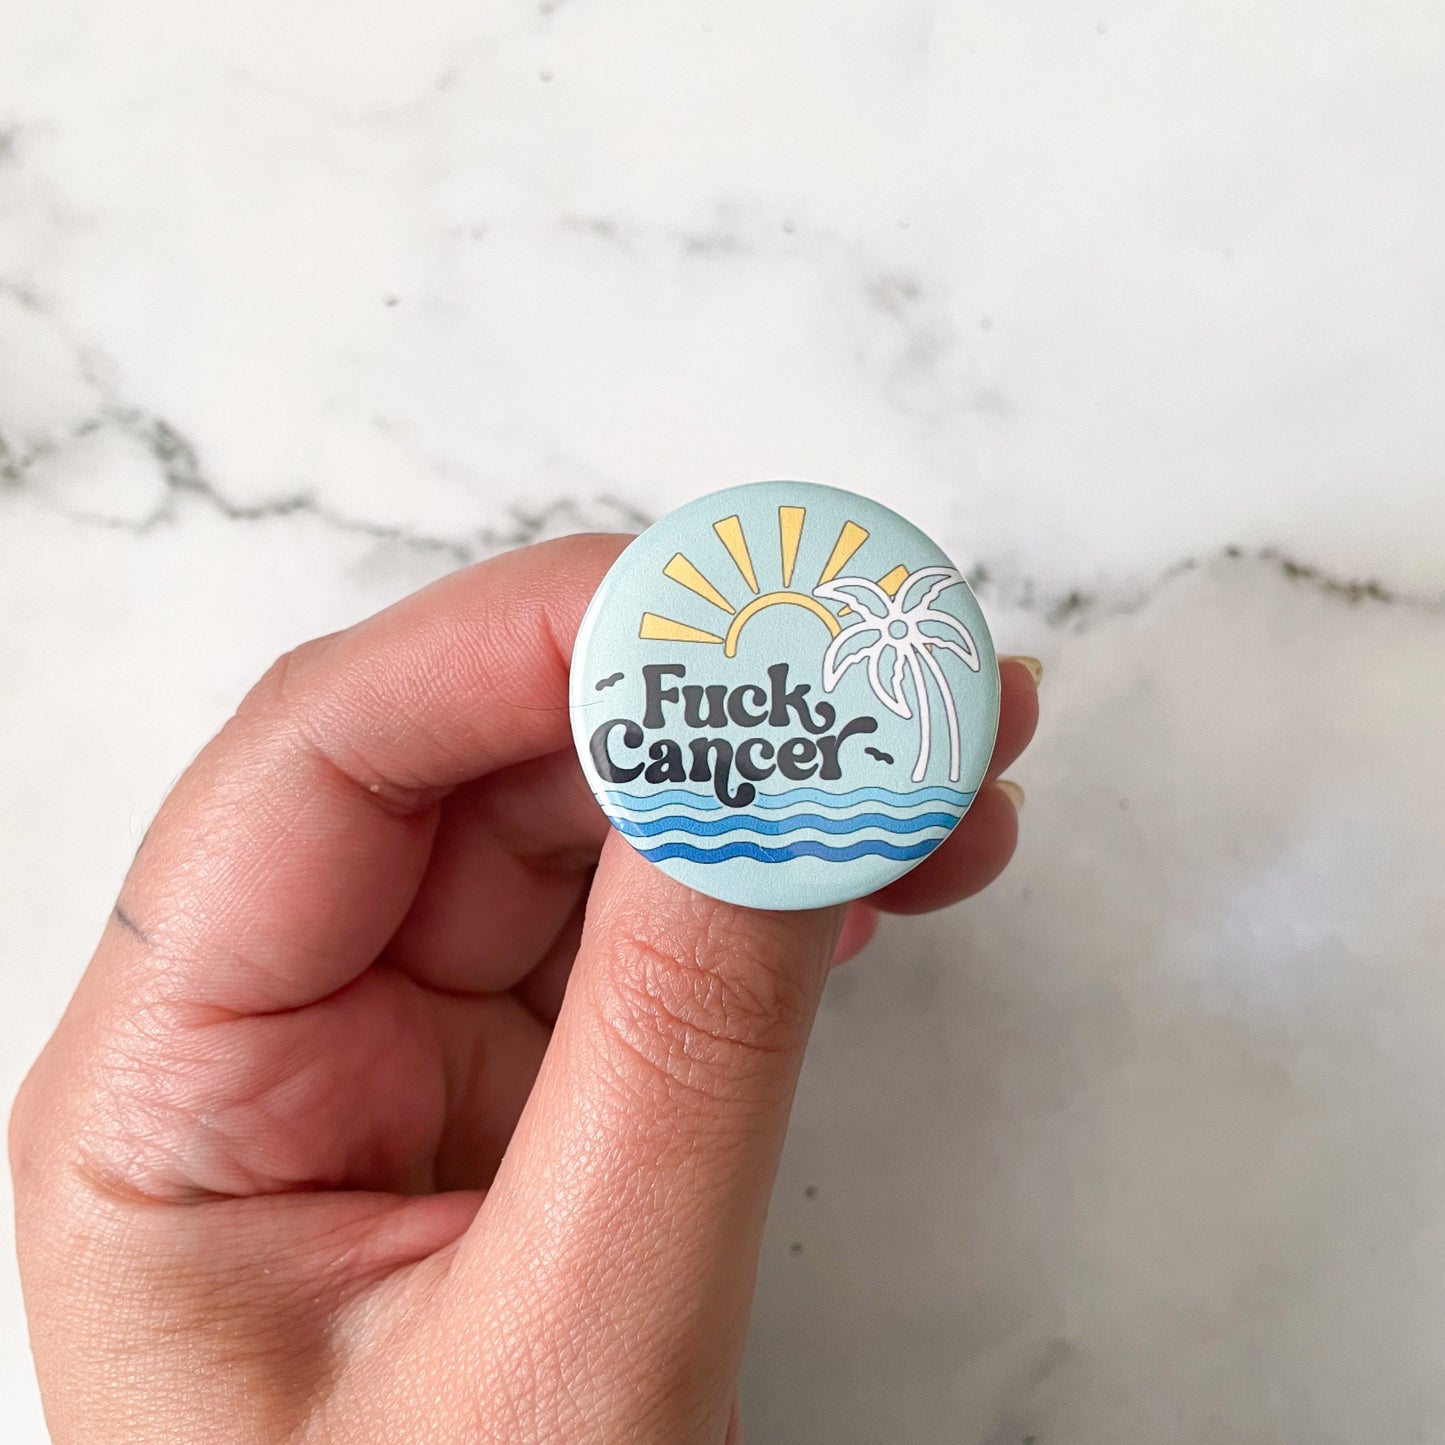 Fuck Cancer Button / Badge (Buy 4 Get 1 FREE)